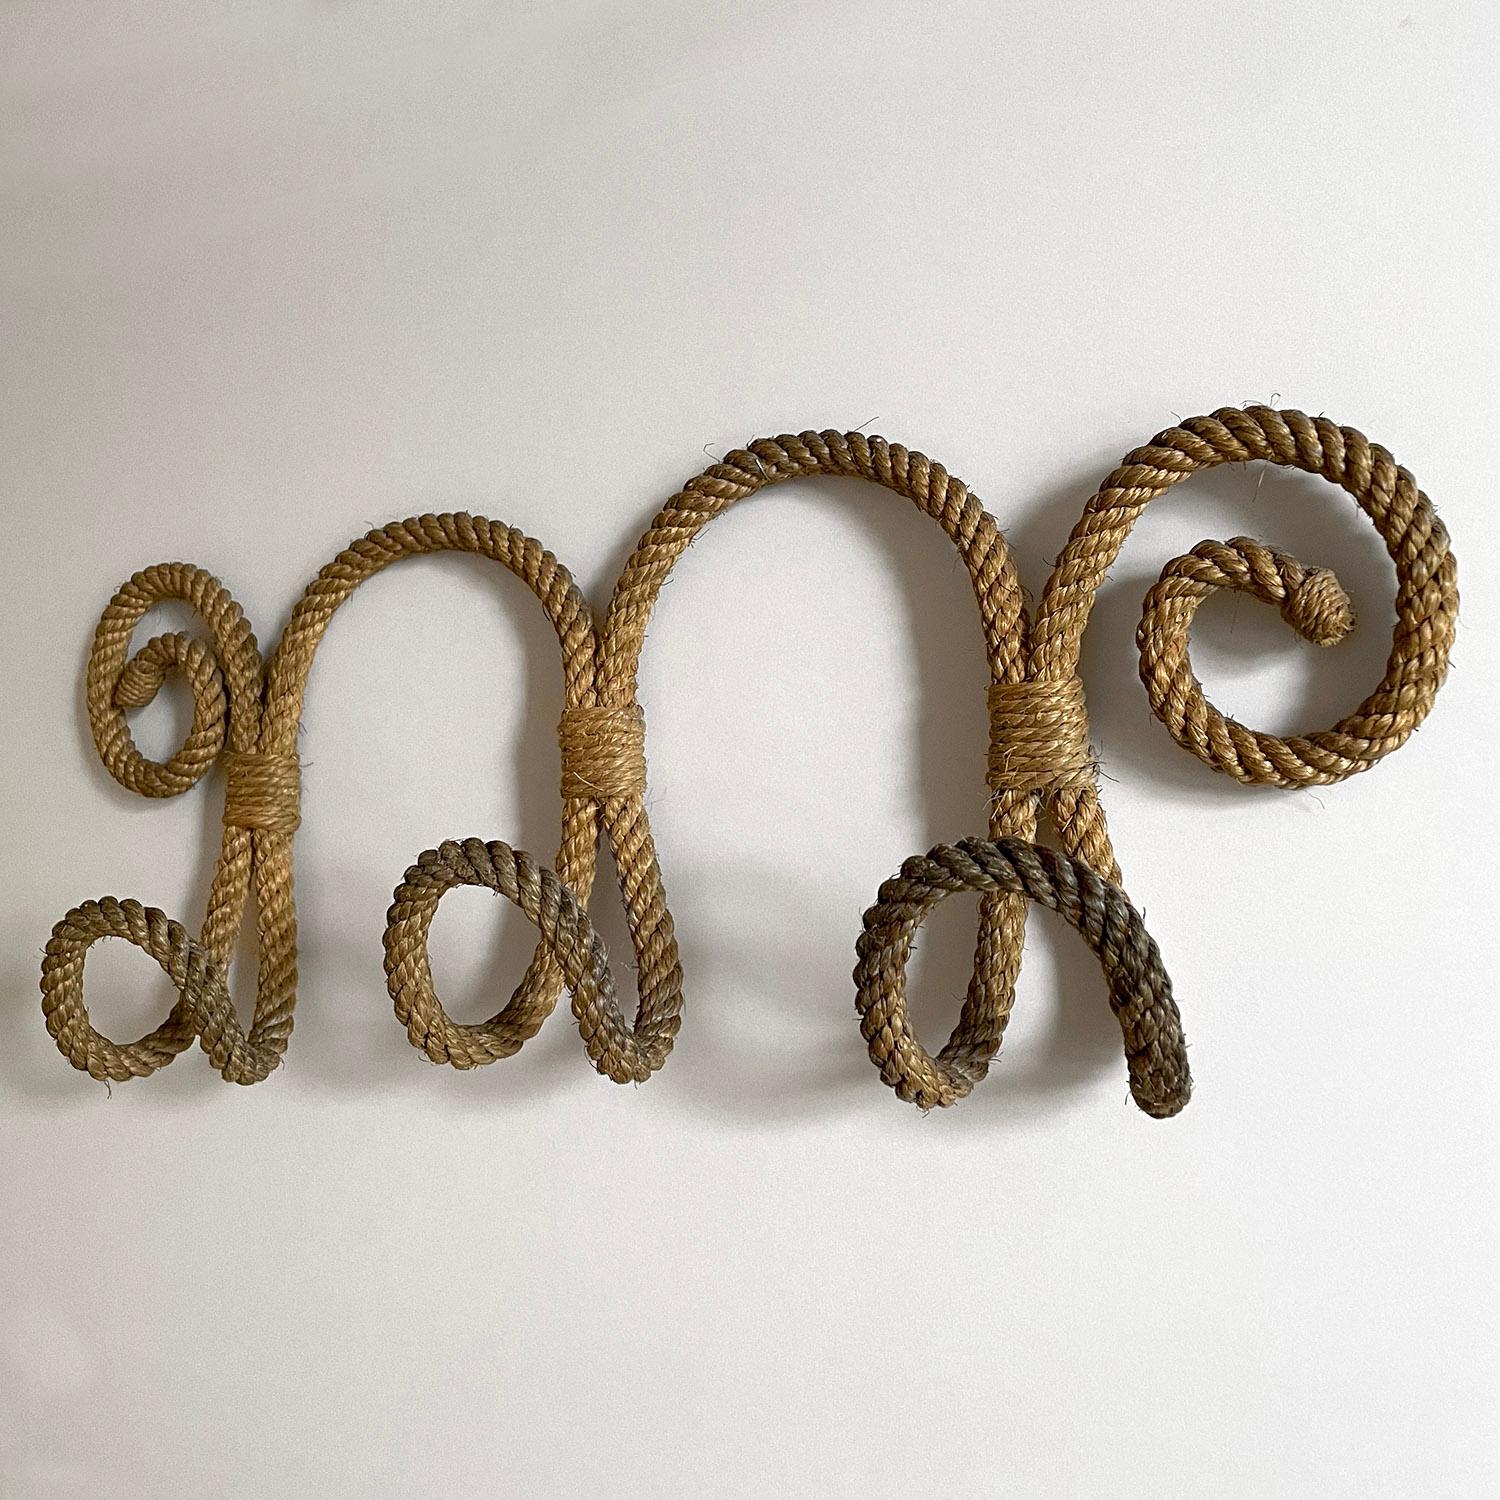 Adrien Audoux & Frida Minet rope coat rack 
France, circa 1950’s
Sculptural rope piece made up of three hooks, beautiful arches and coiled ends
Beautifully worn in from years of love and wear, ready for many more to come
Each hook has a blue hued